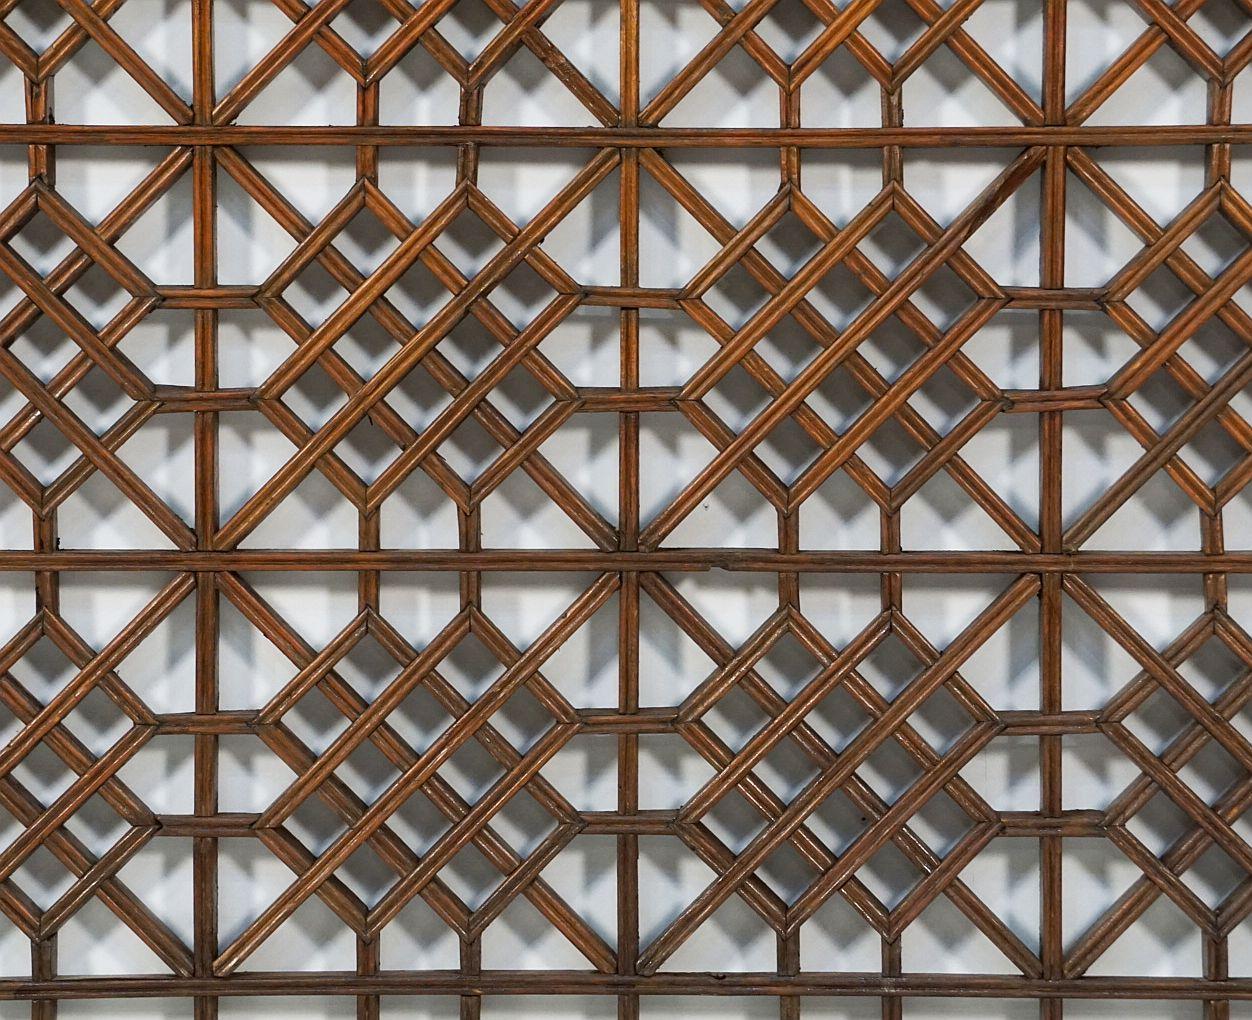 Chinese Decorative Lattice Wood Panels or Window Screens - Sold as a Set 4